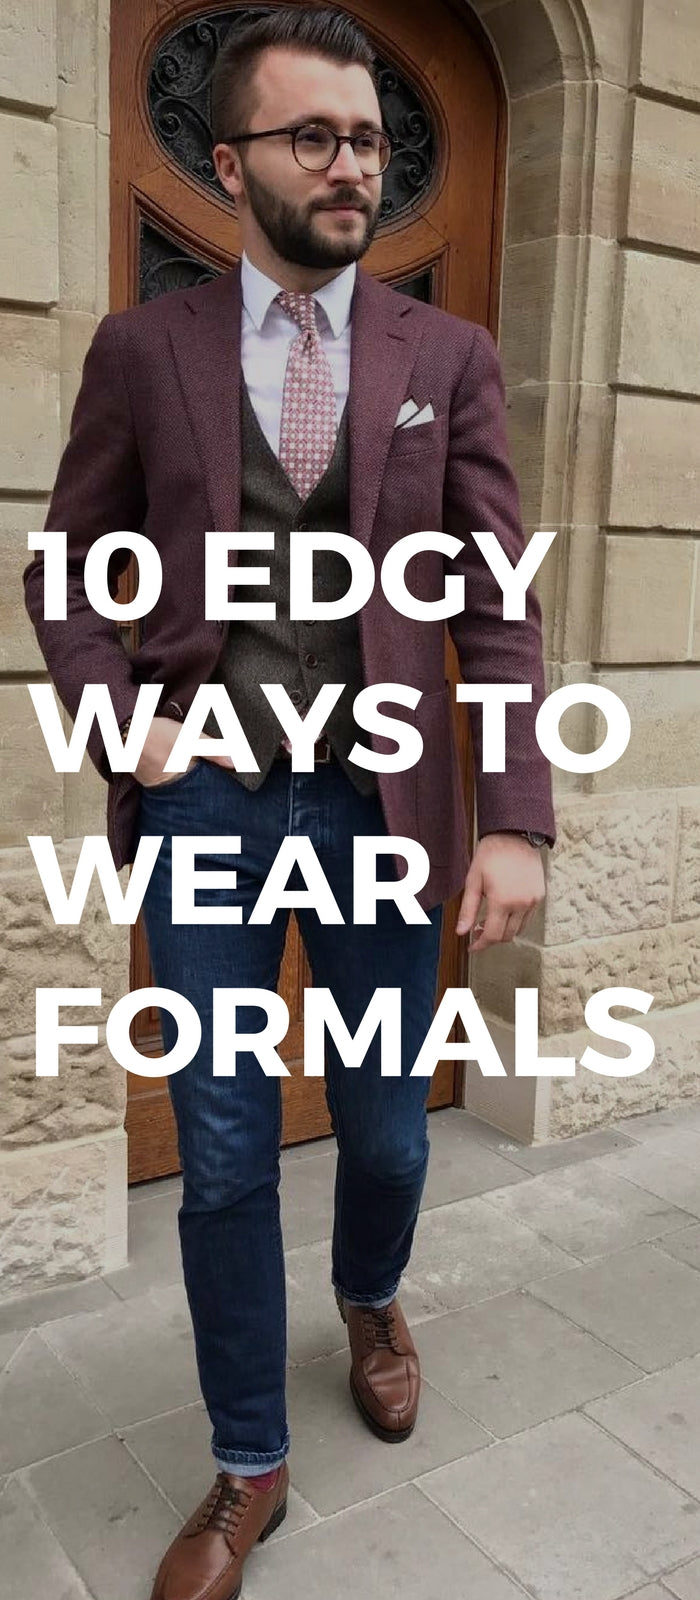 Formal outfit ideas for men